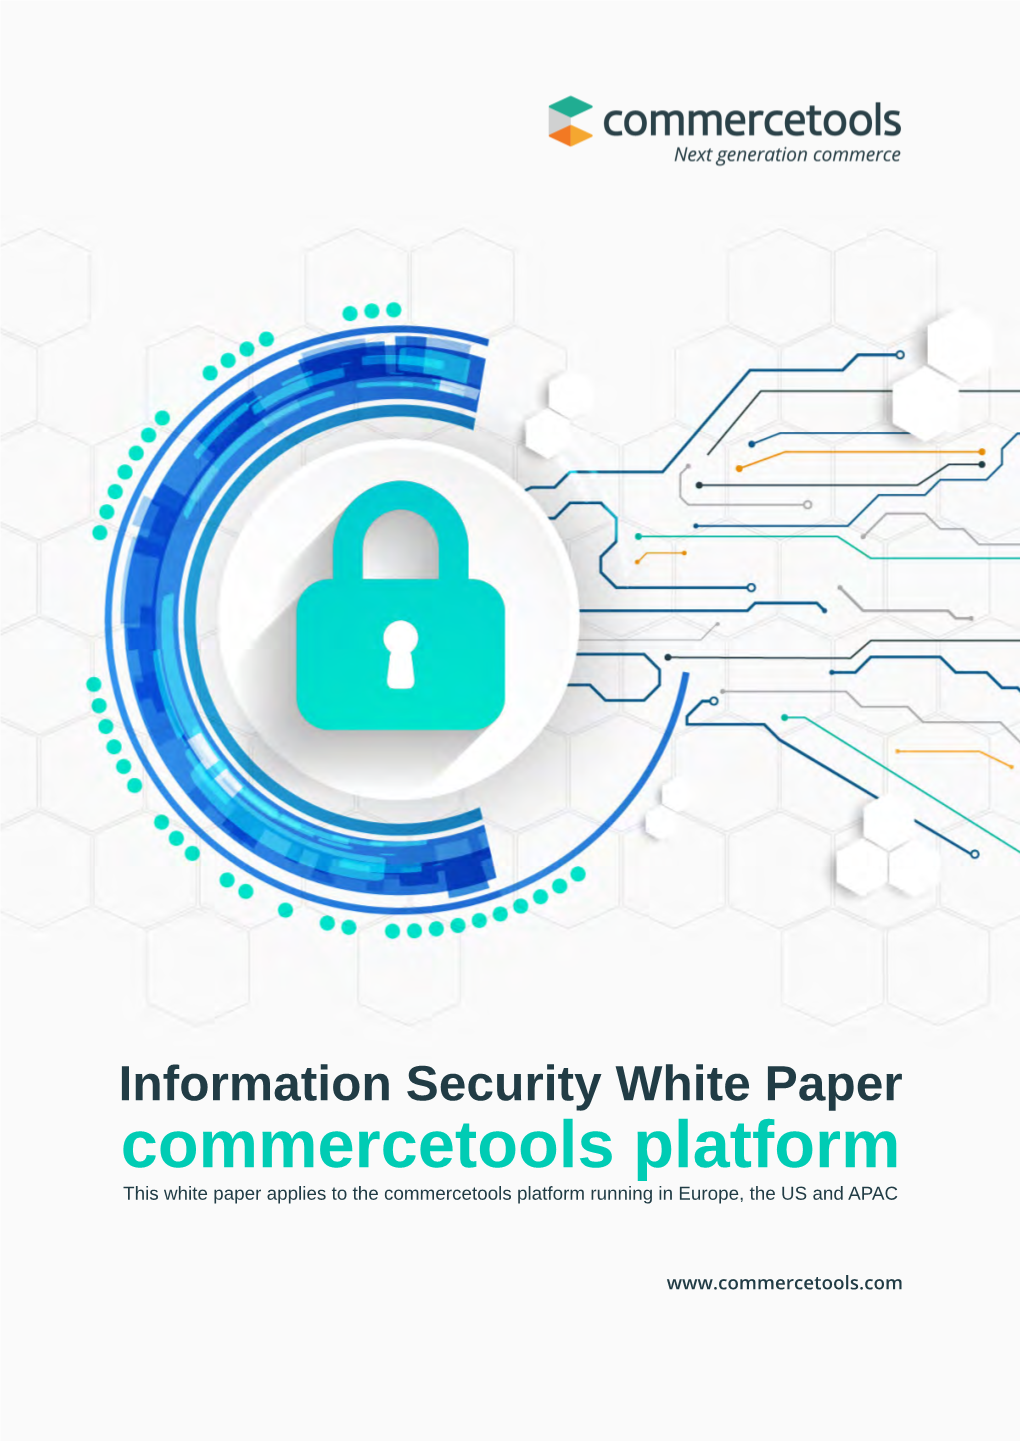 Information Security White Paper Commercetools Platform This White Paper Applies to the Commercetools Platform Running in Europe, the US and APAC